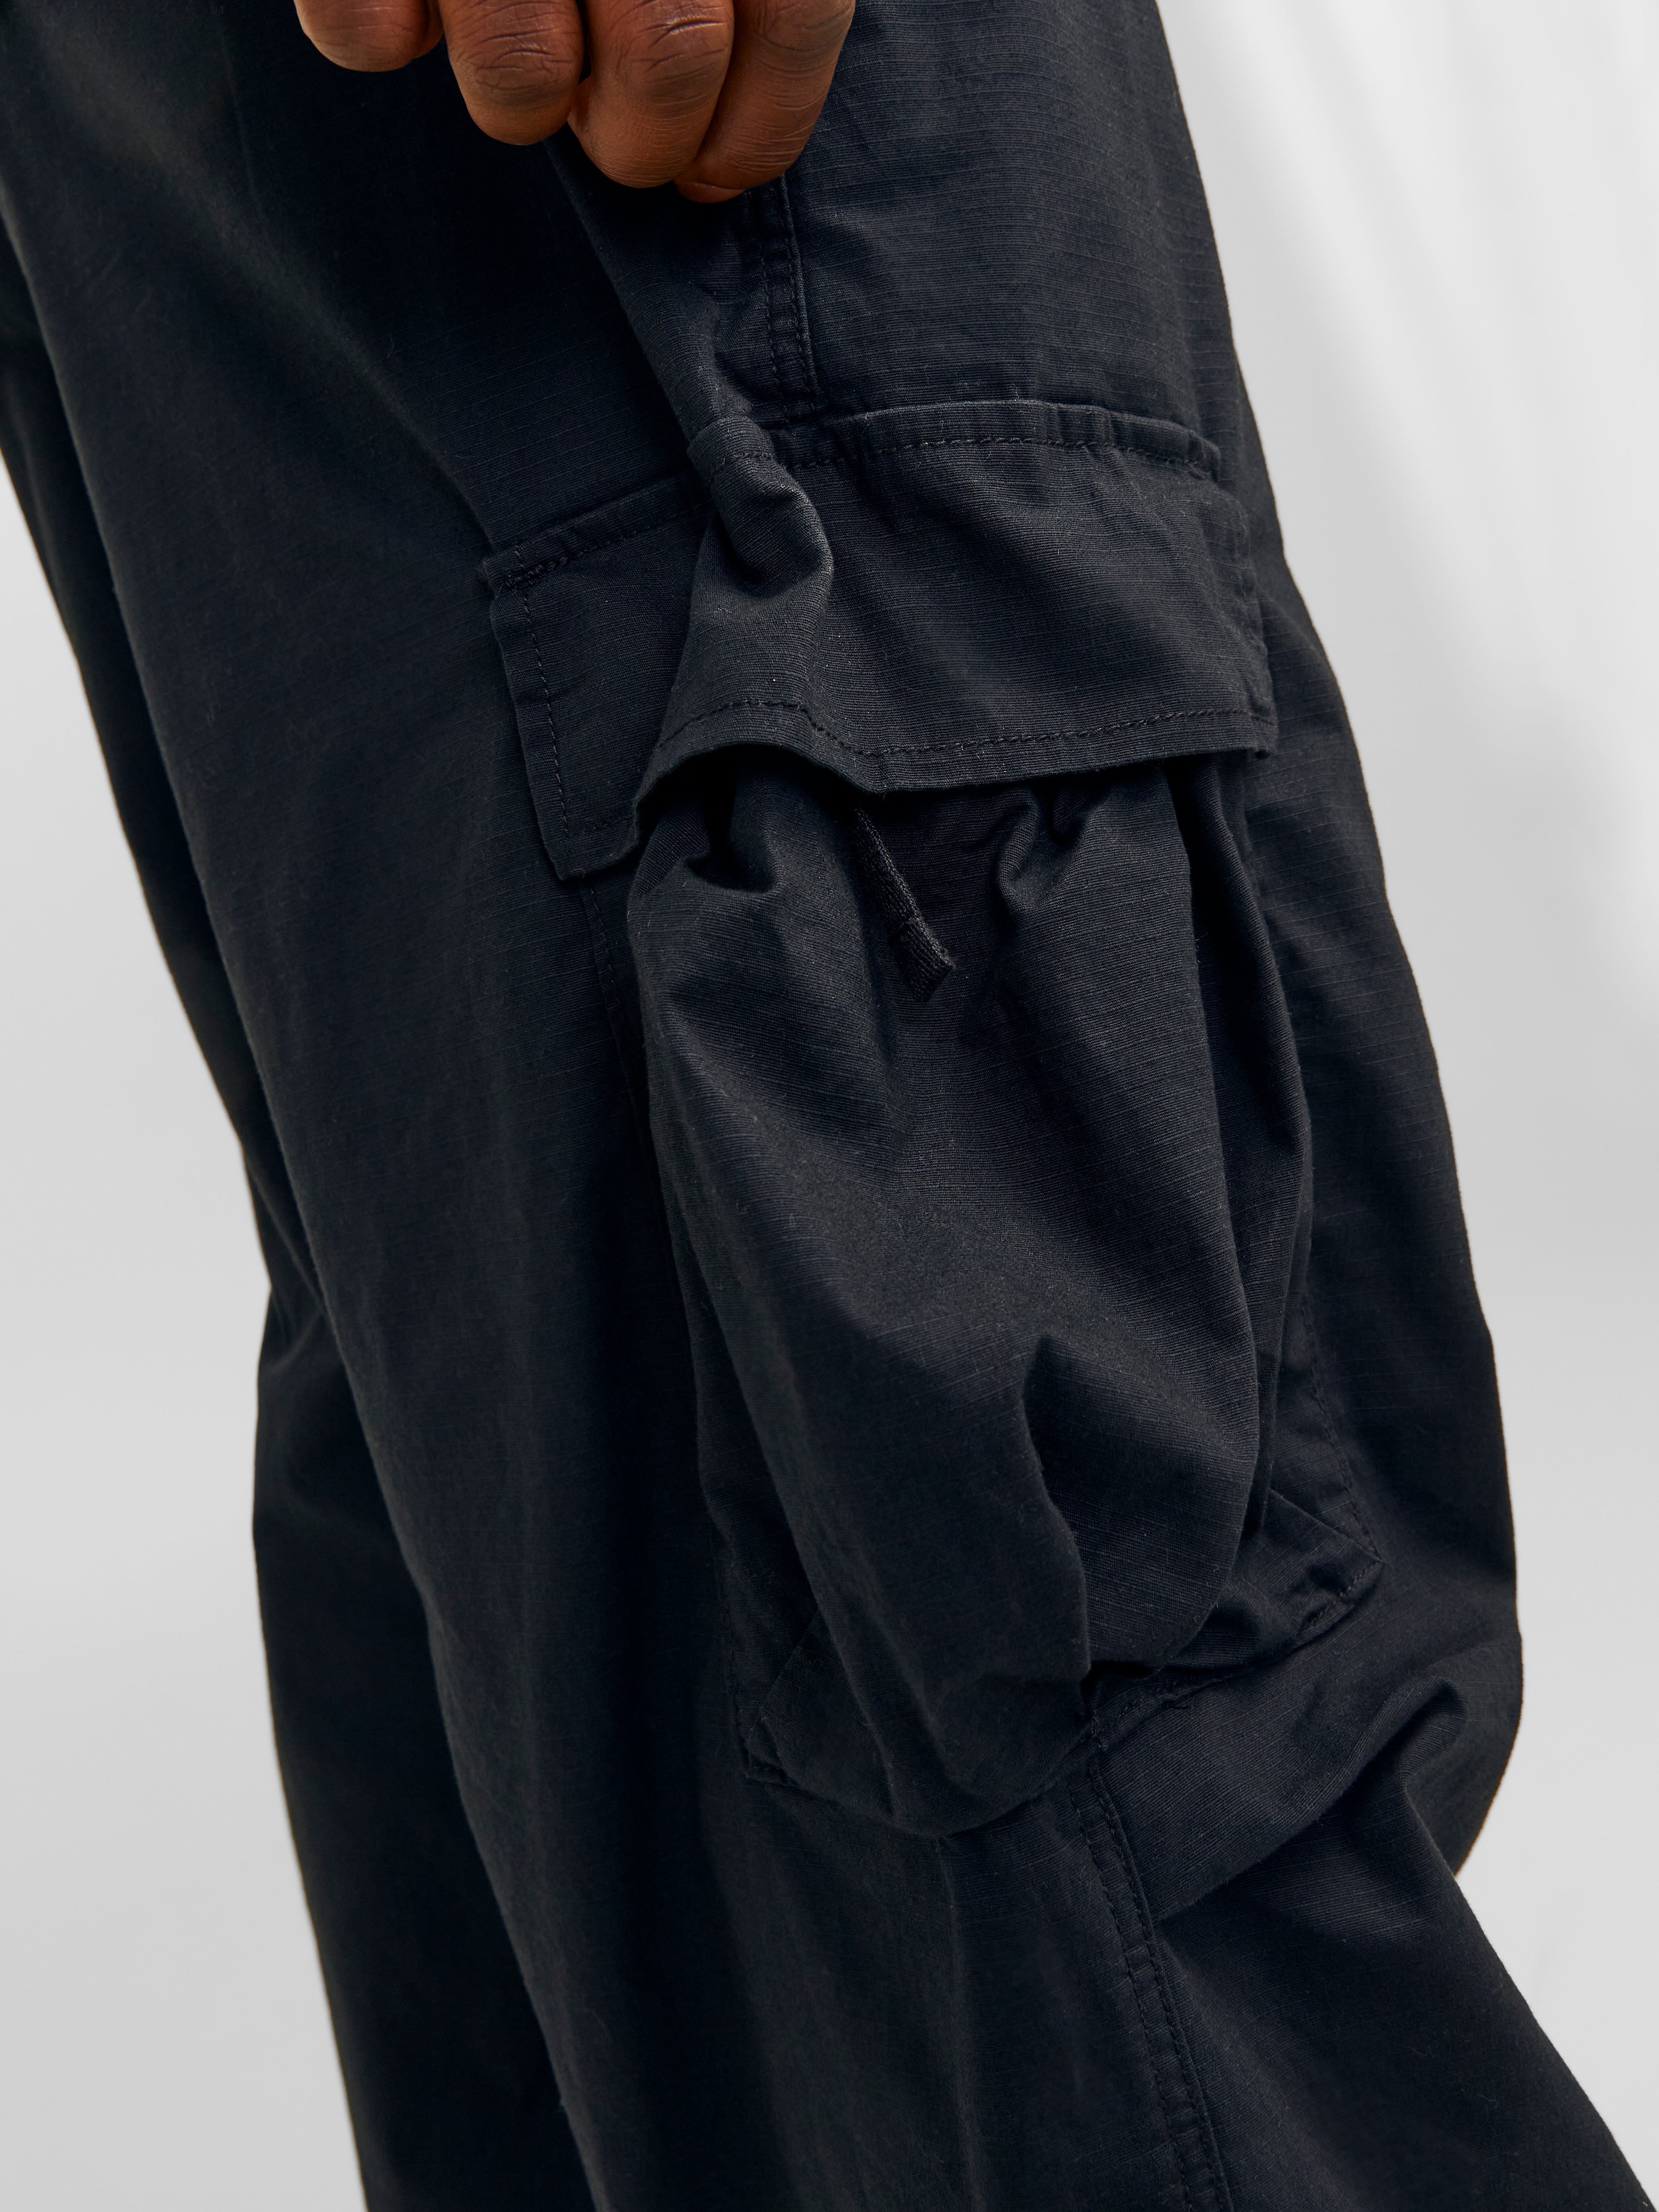 NS Balloon Ankle Length Fit Men's Track Pant